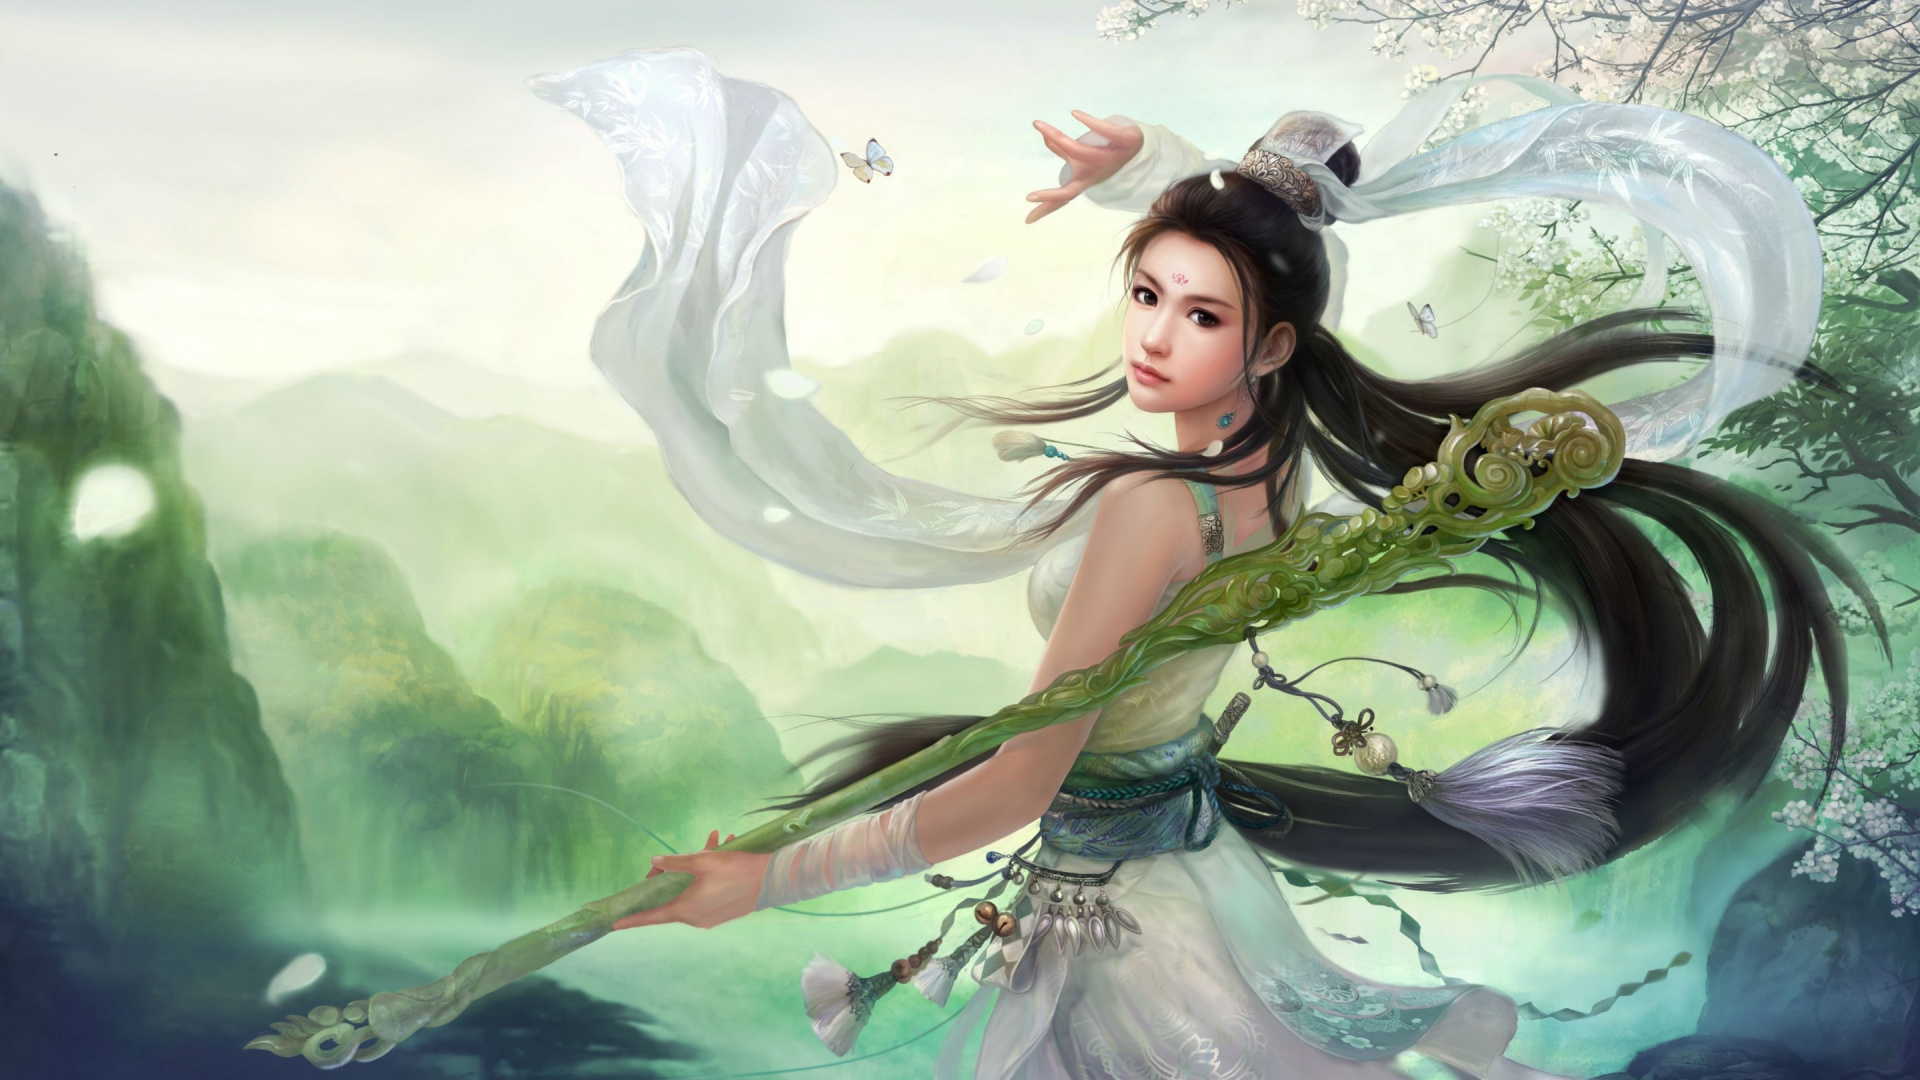 Woman in Green Dress With White Wings Illustration. Wallpaper in 1920x1080 Resolution